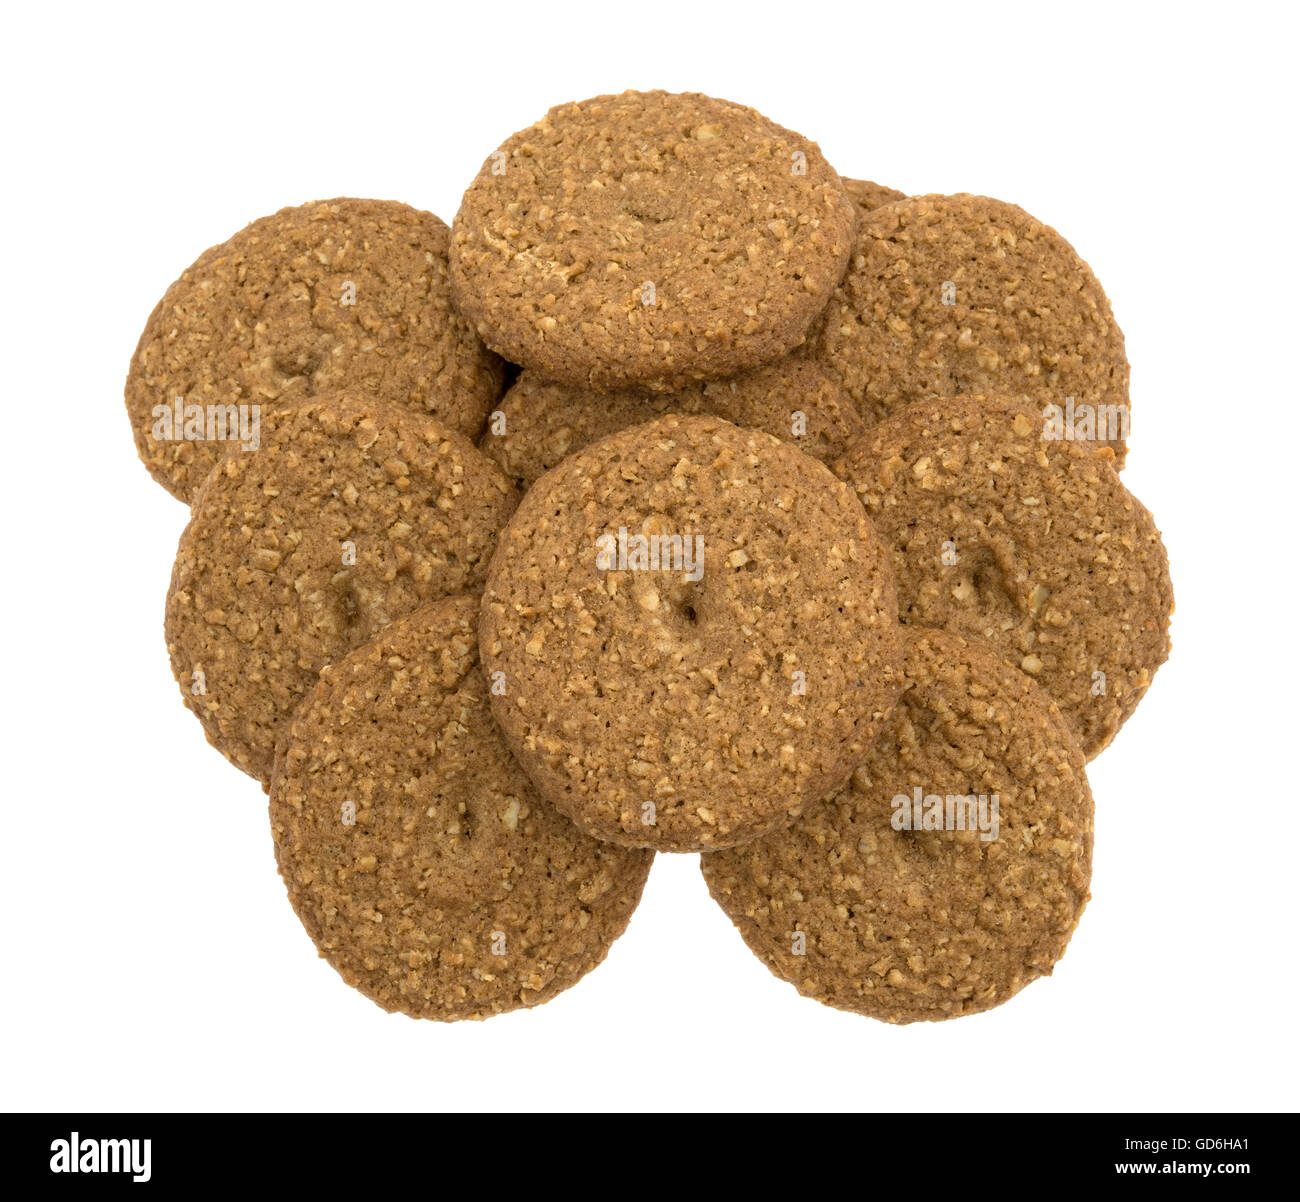 Large group of oatmeal sugar free cookies isolated on a white background. Stock Photo